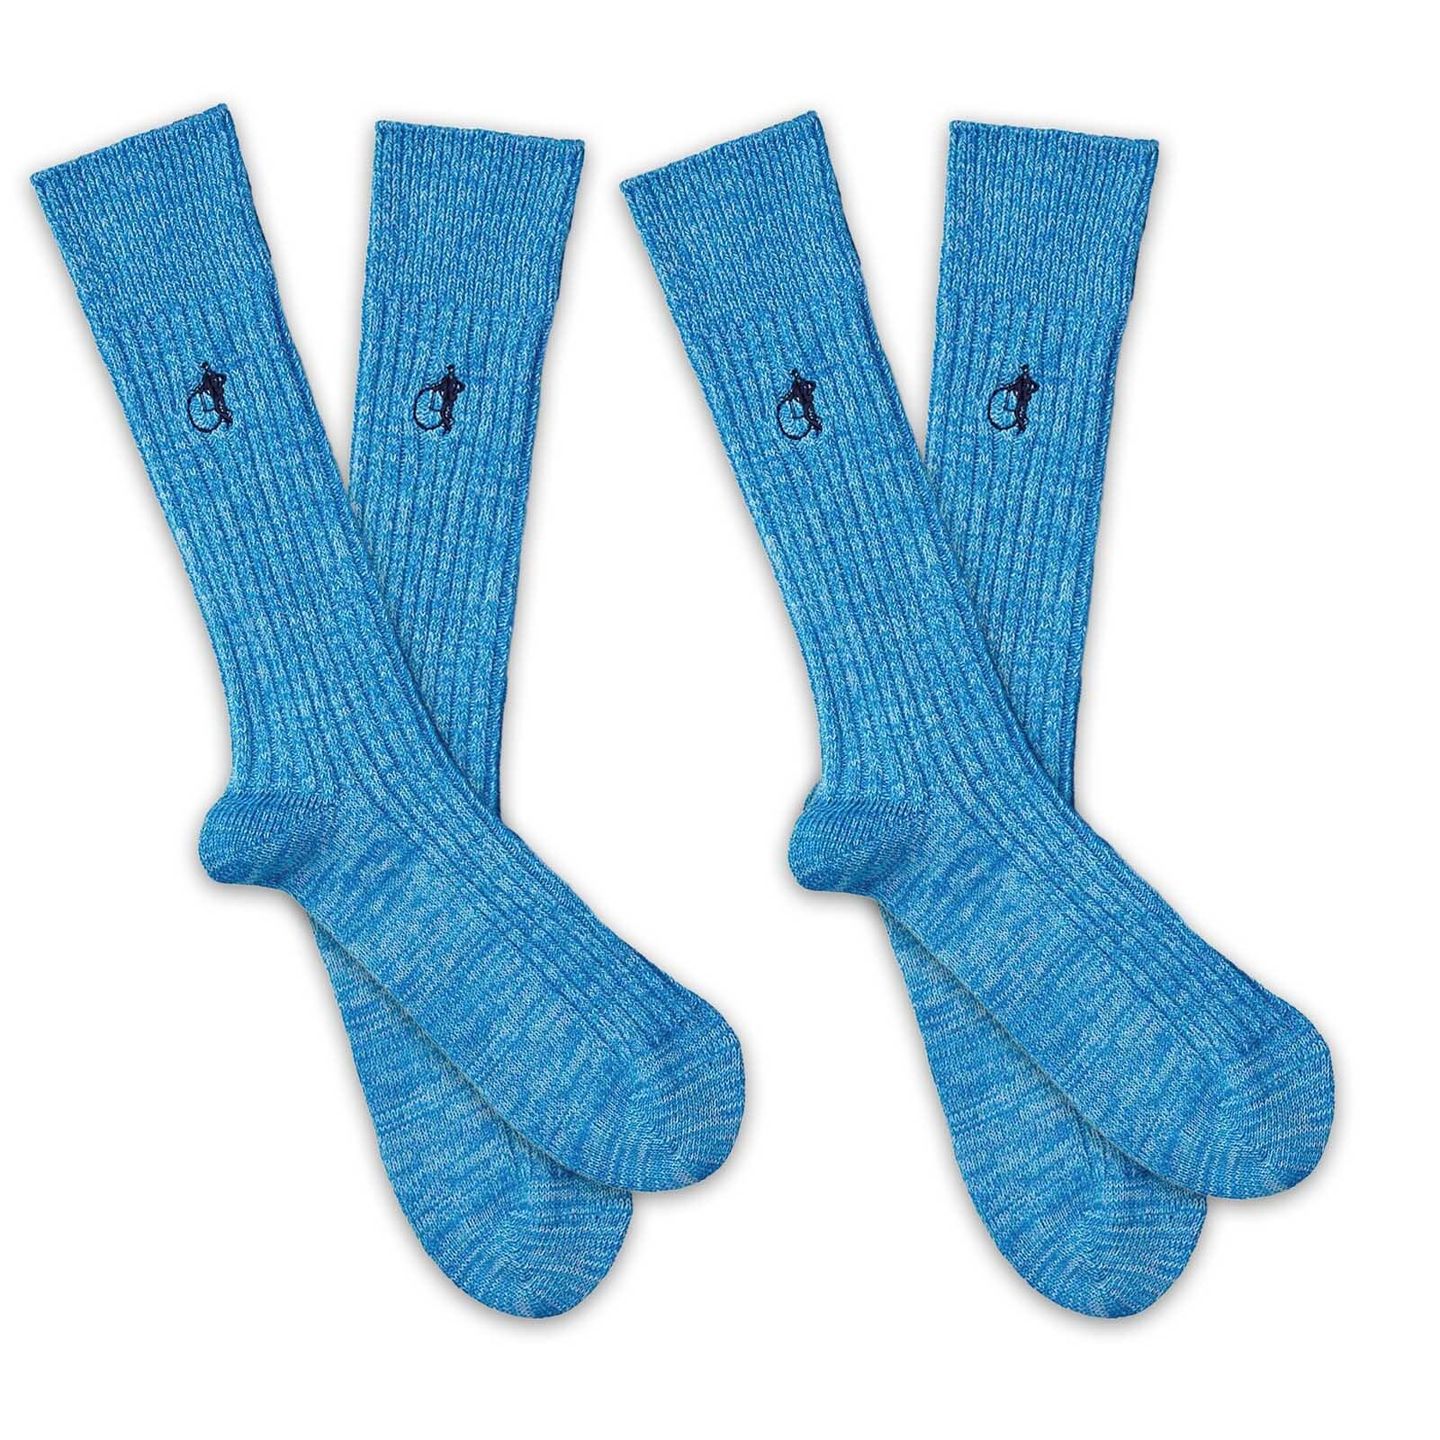 2 pairs of ice blue boots socks